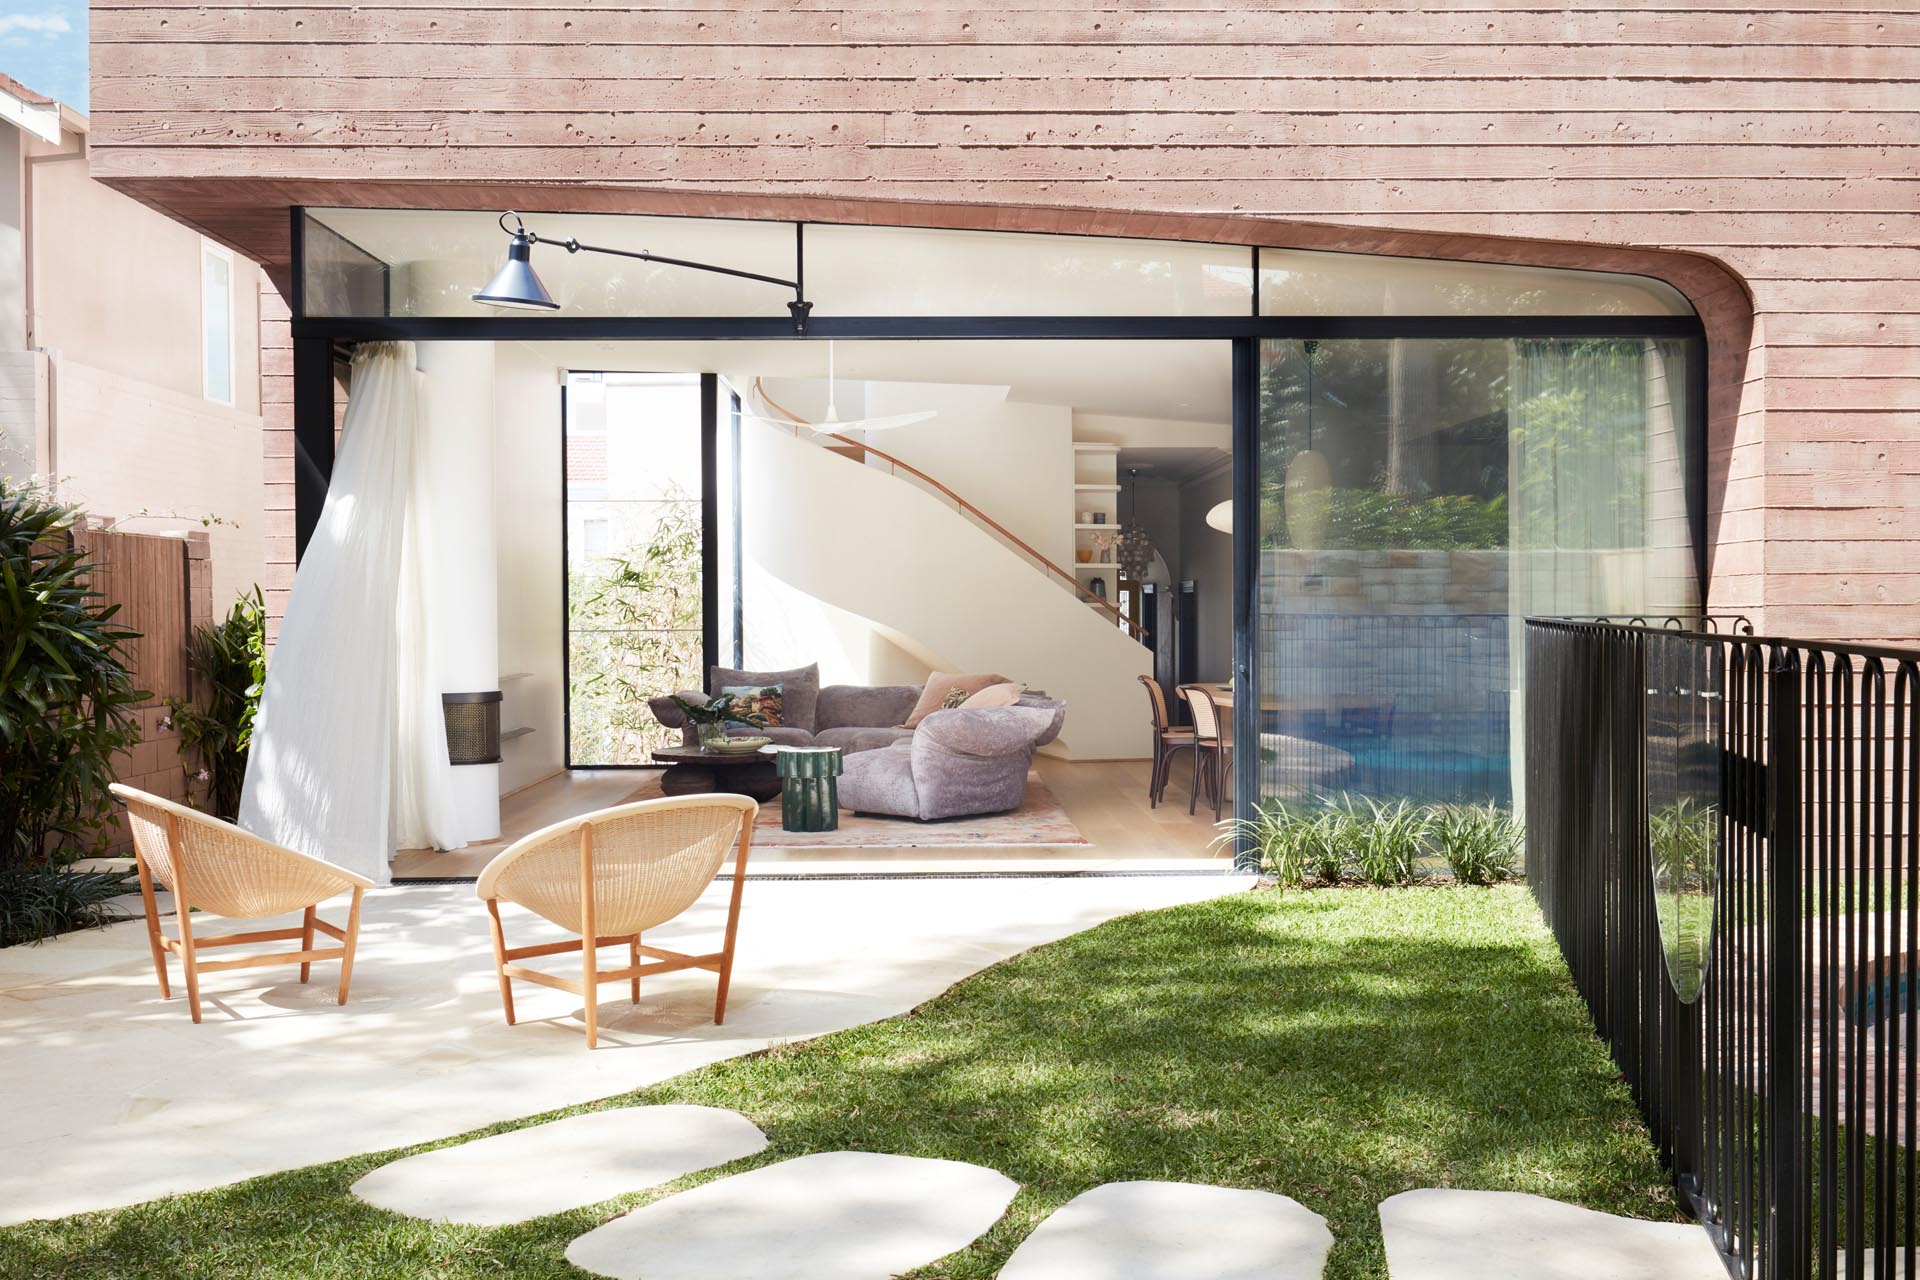 This simple patio is connected to the interior spaces by a large sliding glass door.